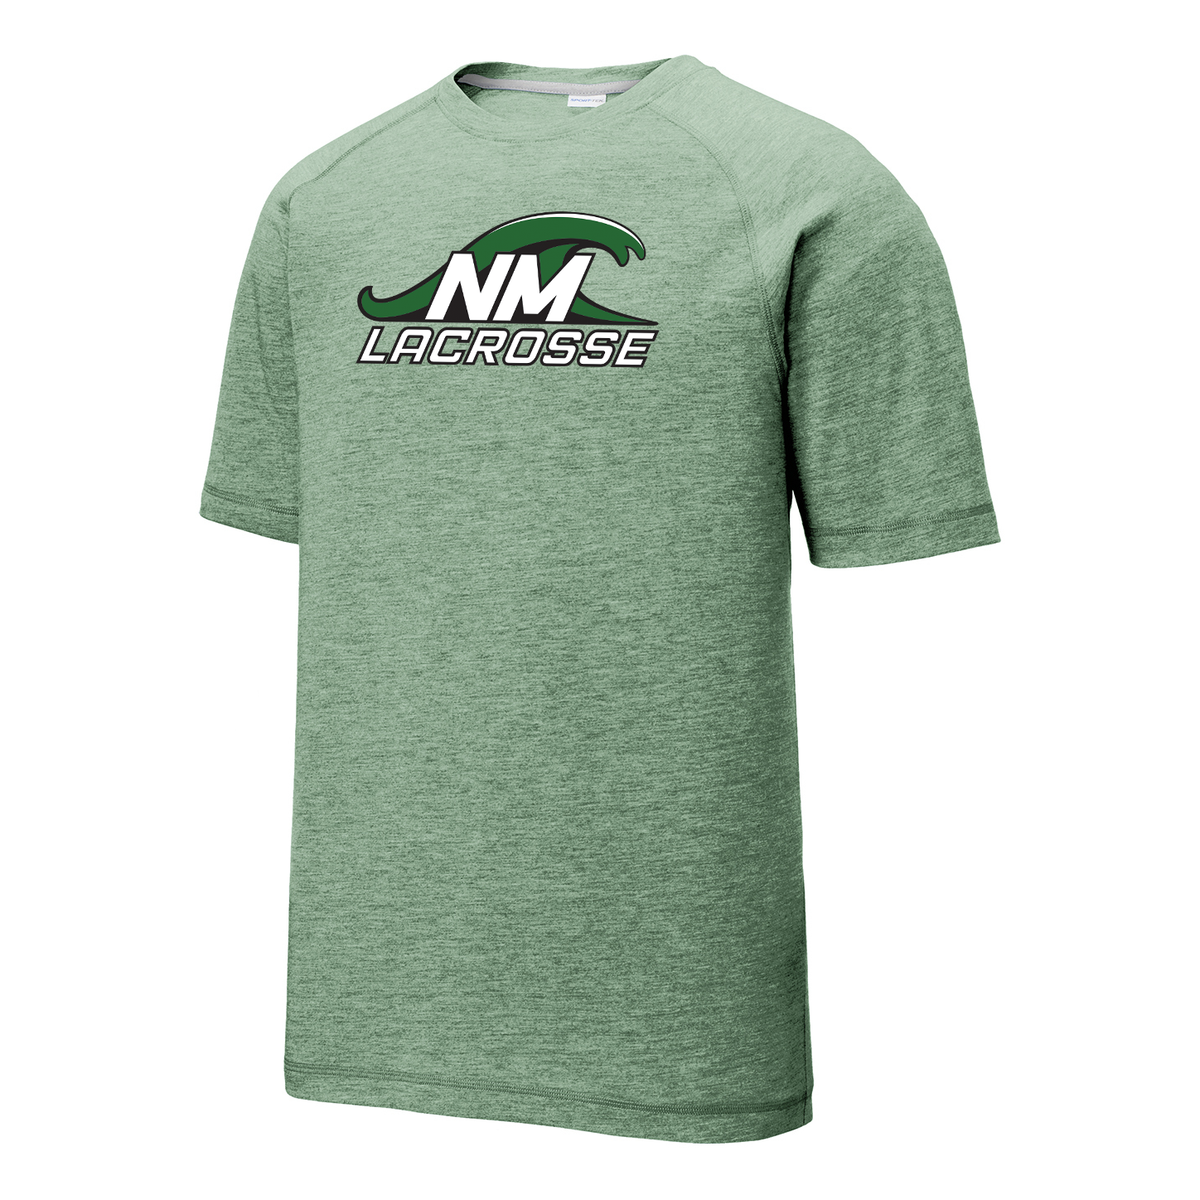 New Milford Youth Lacrosse Raglan CottonTouch Tee